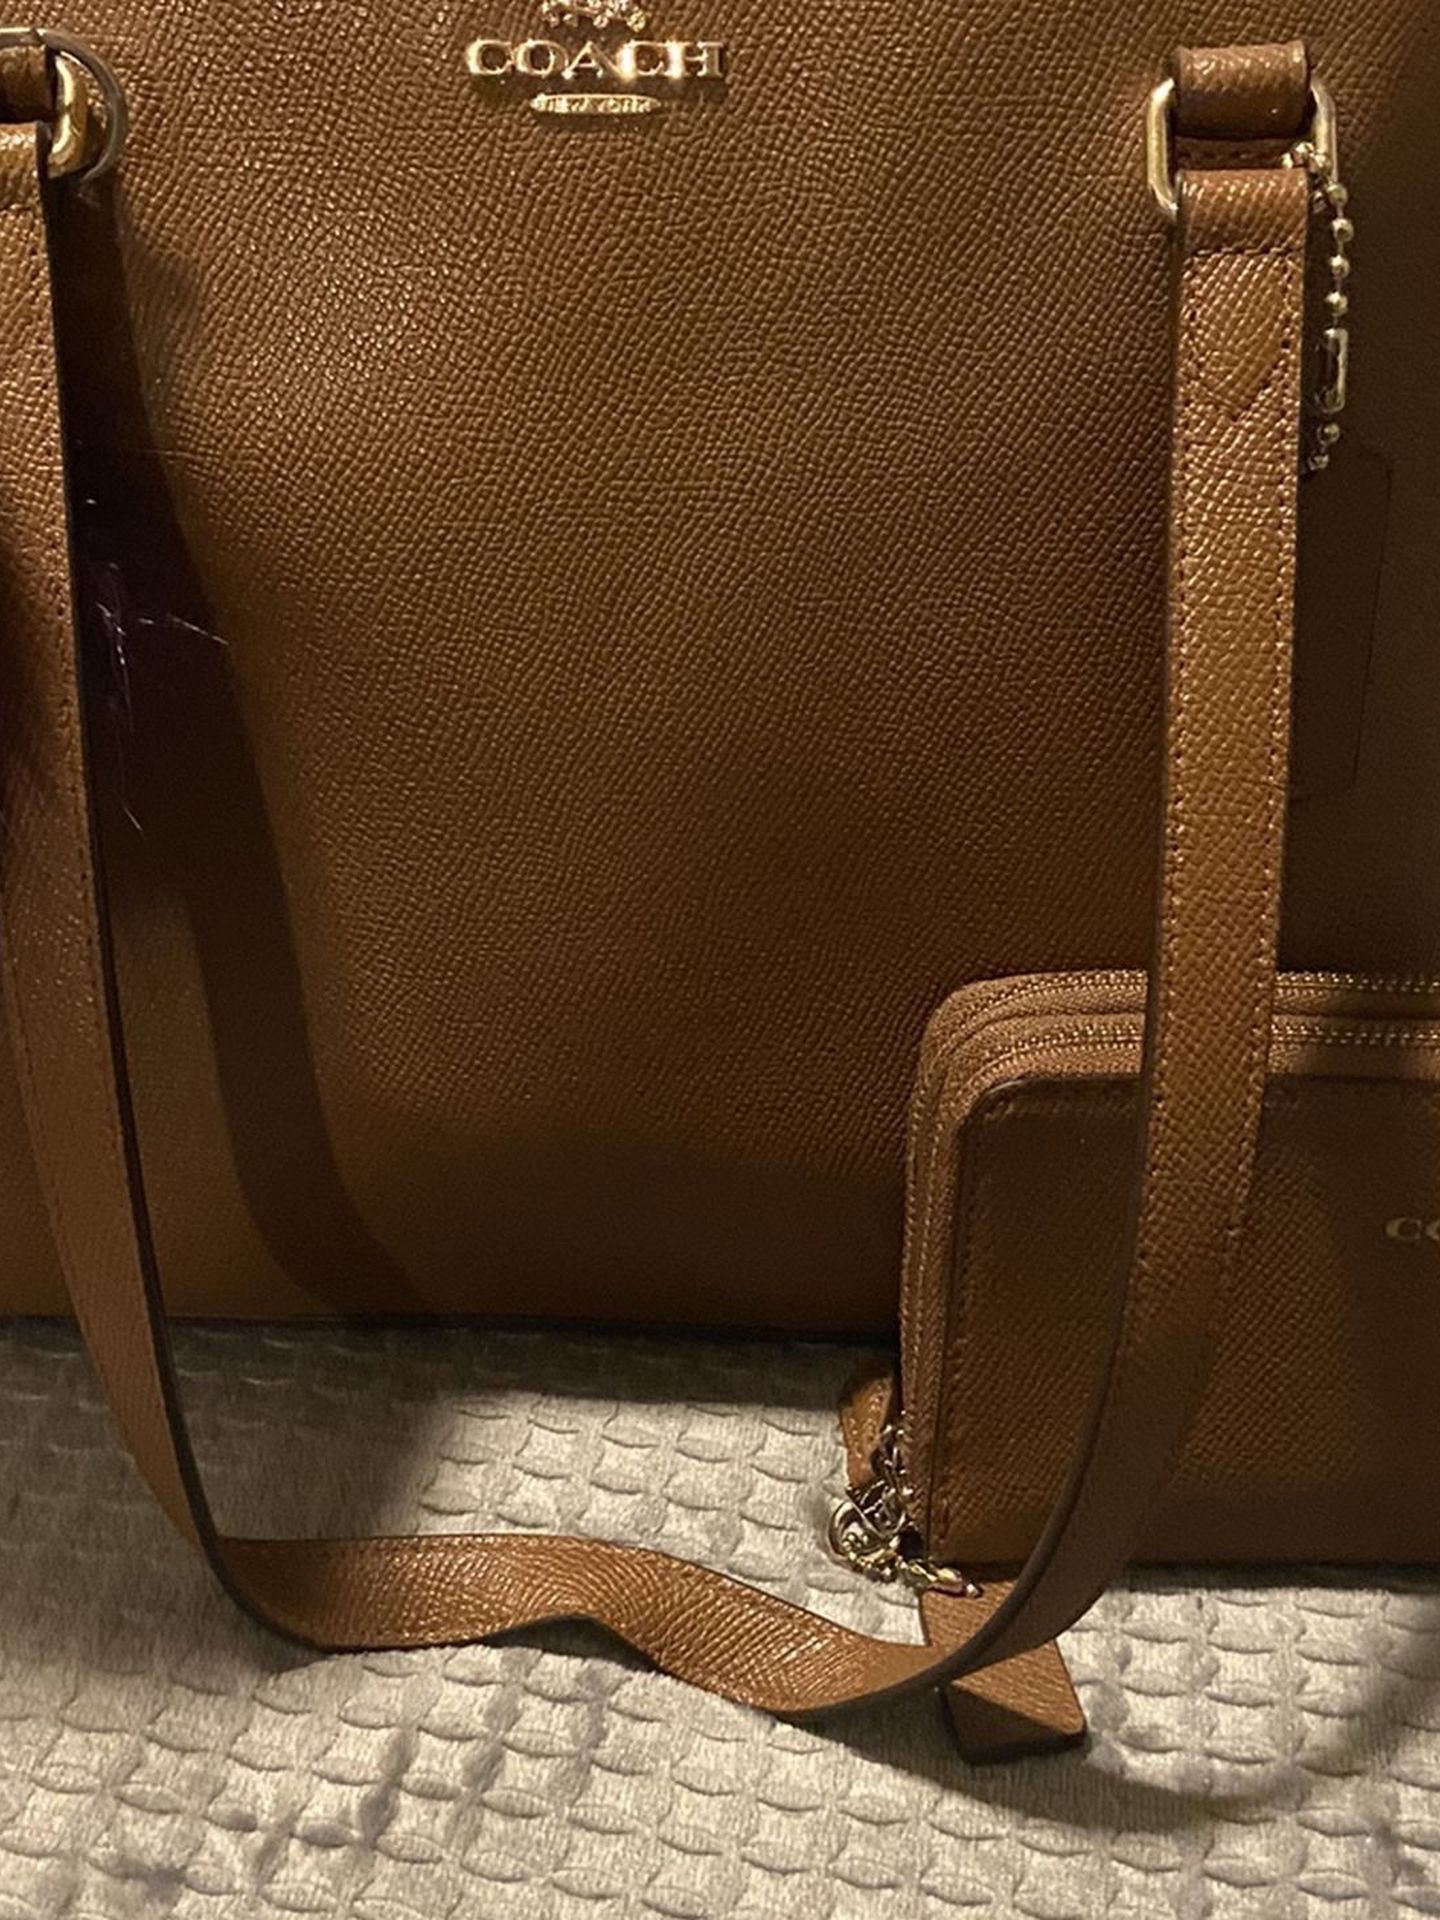 Coach Purse And Matching Wallet